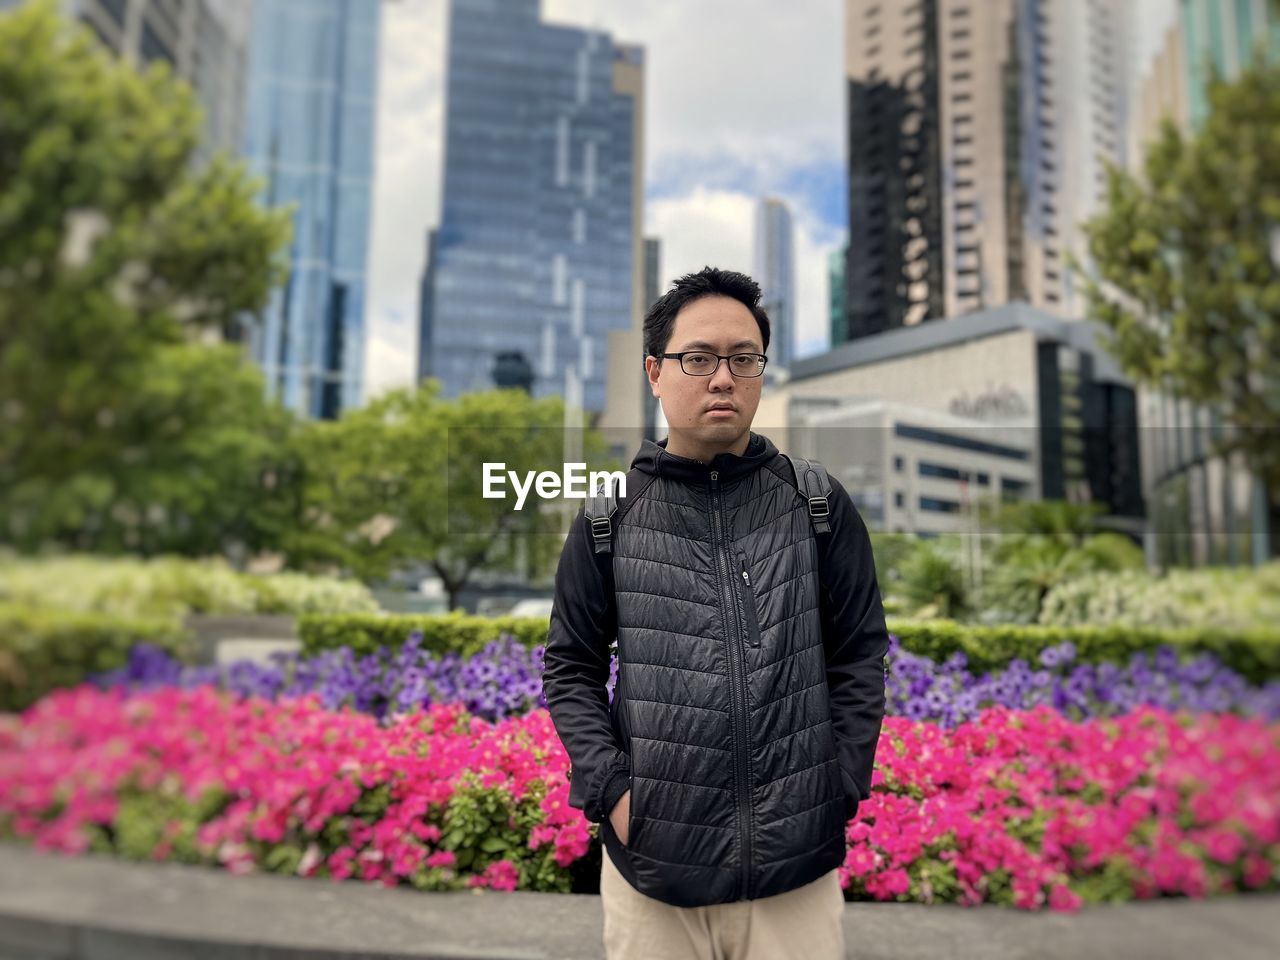 Young asian man standing against flower beds, trees and skyscrapers in the city.